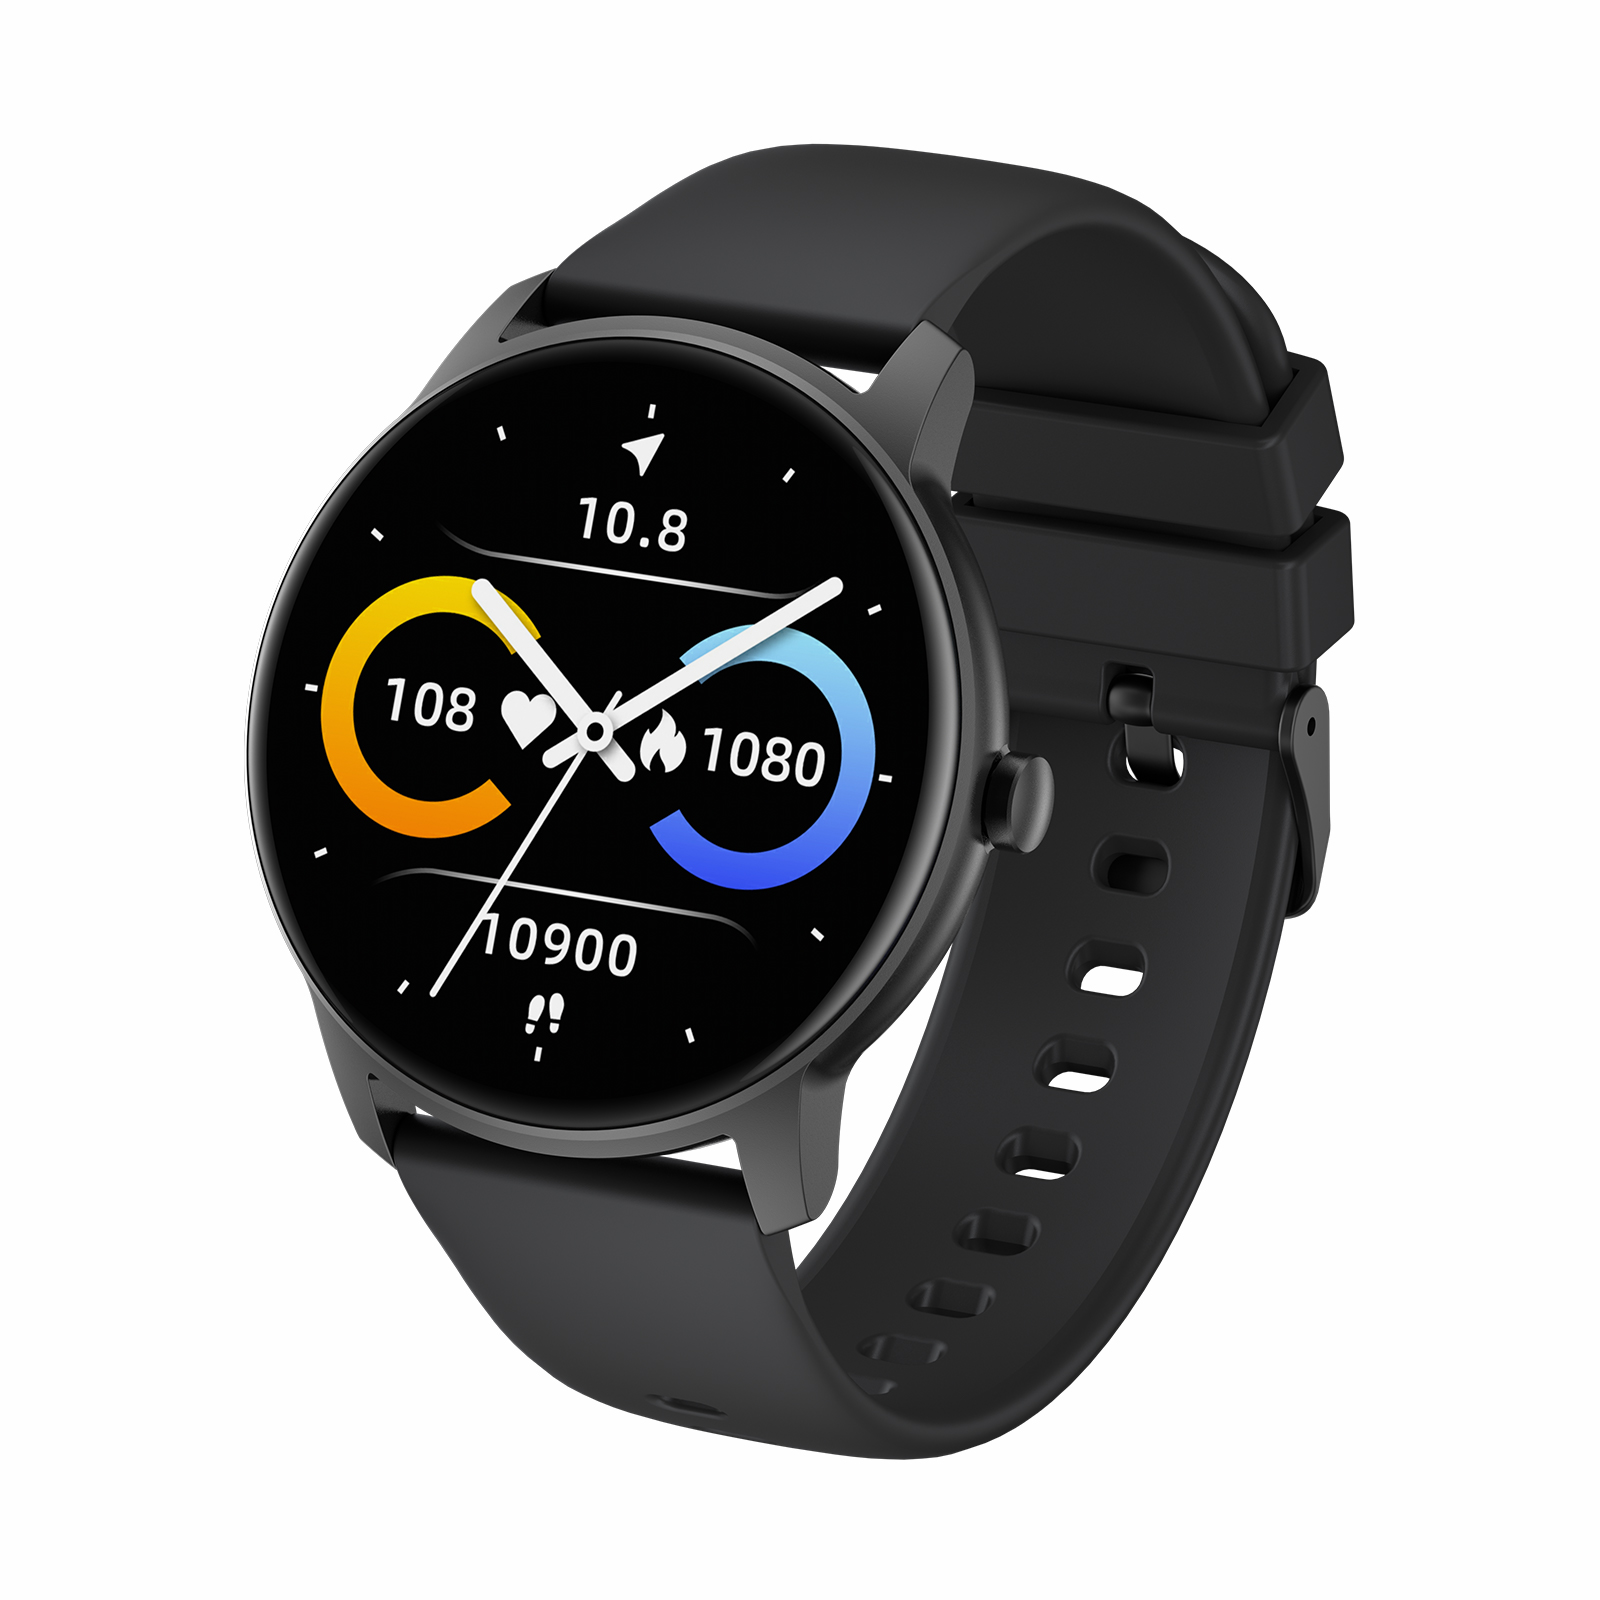 WiWU SW03 Smart Watch for Android Phones IOS Swim Watch with Heart Rate Monitor Pedometer Calorie Counter